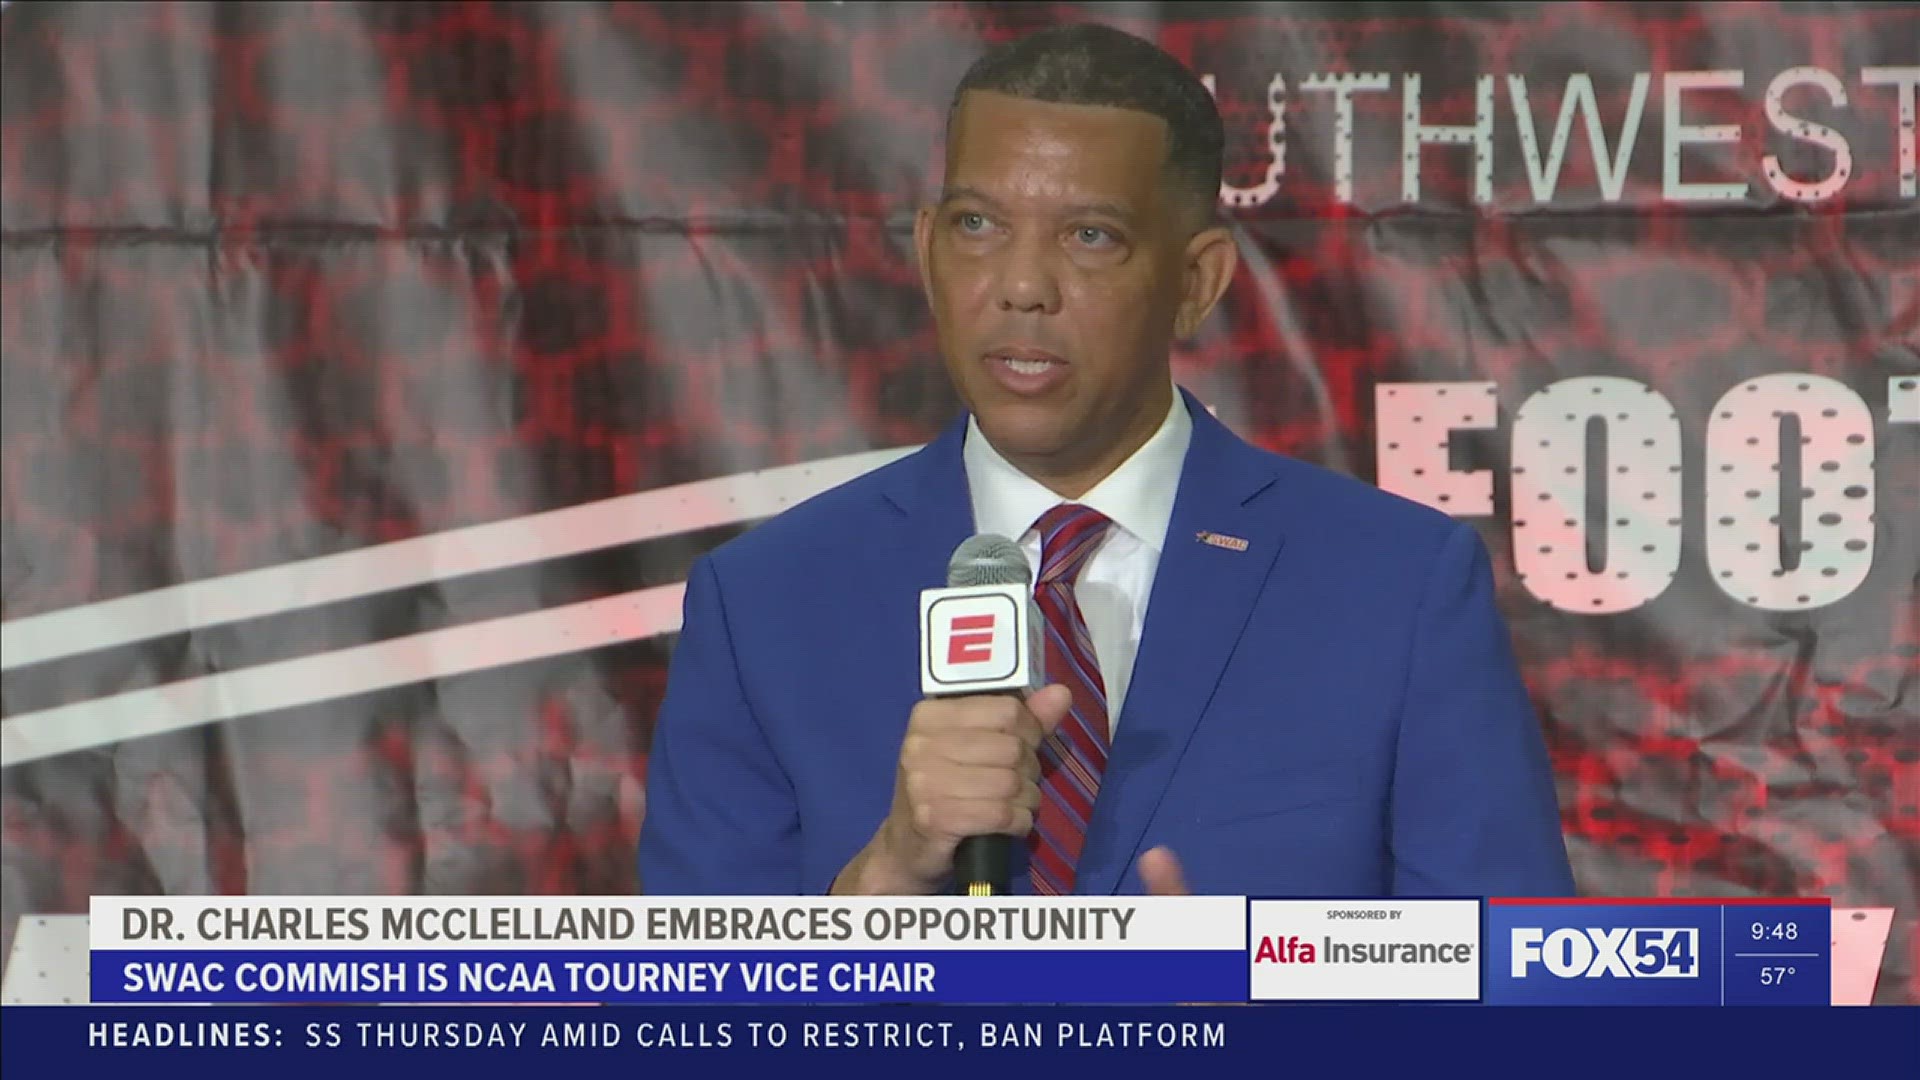 Dr. Charles McClelland is the first person representing a HBCU league or school to chair the Division I Men's Basketball Commit